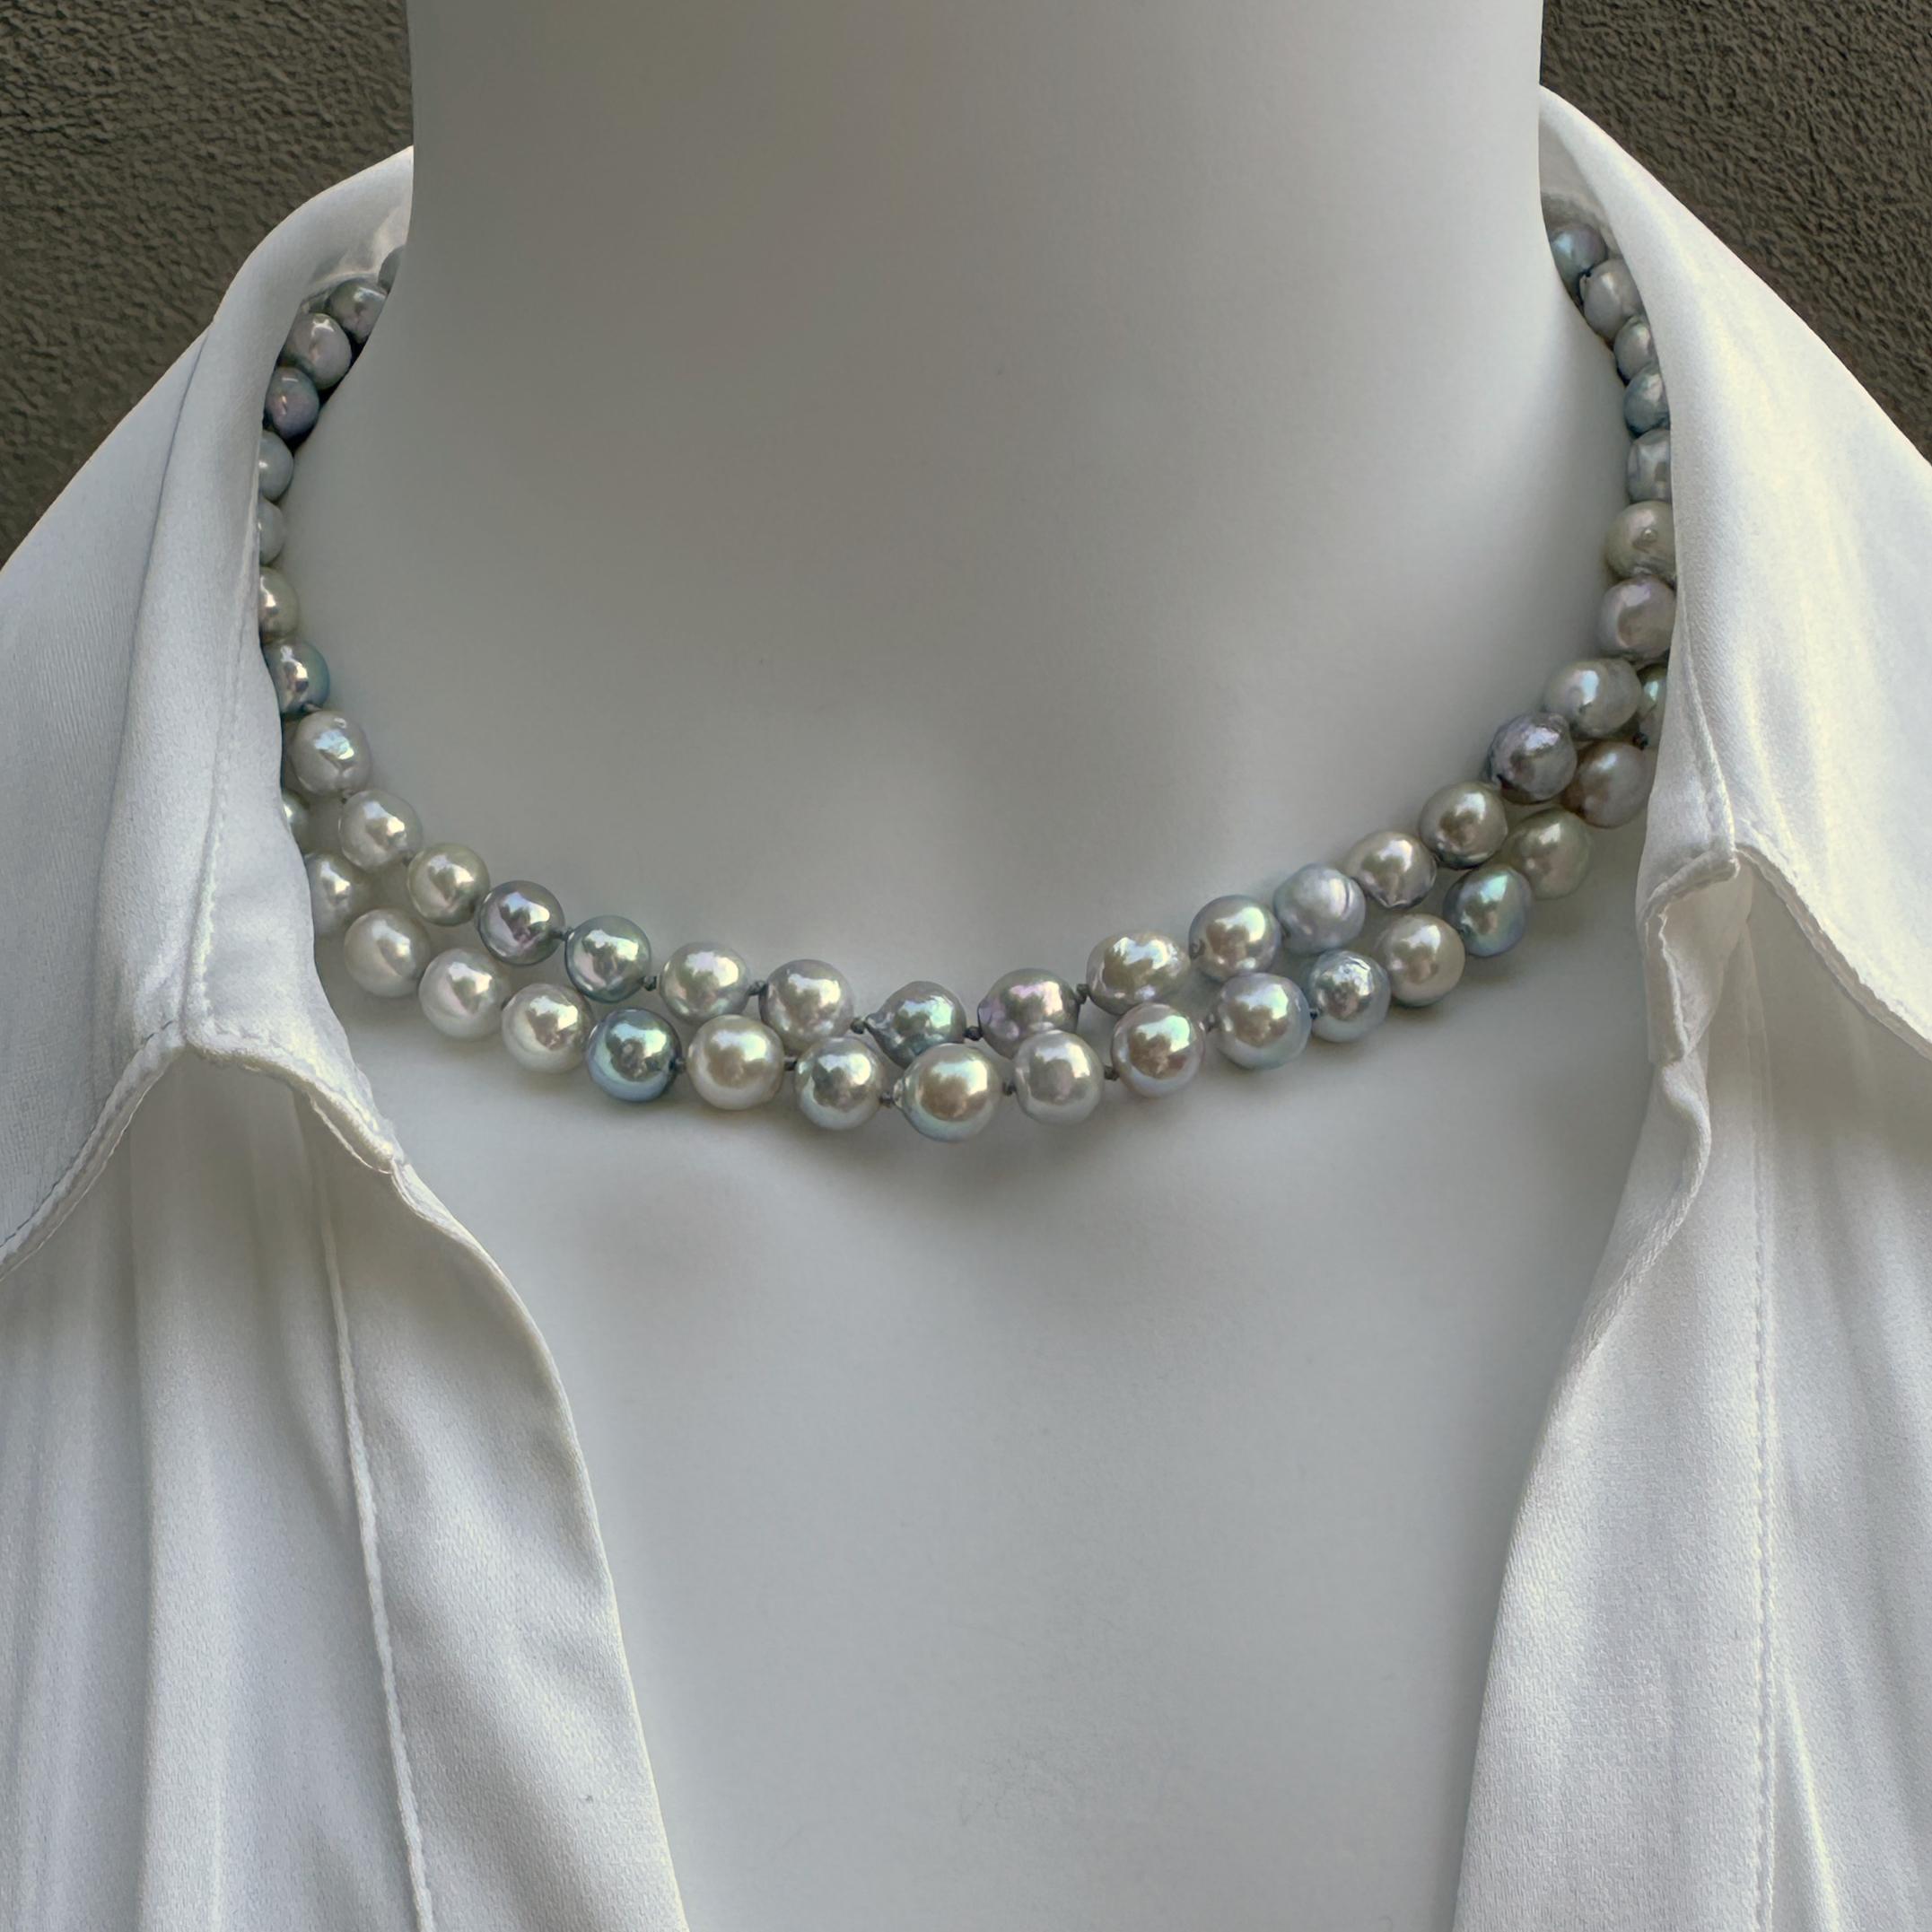 We got these gorgeous and distinctive pearls at a trade show* in July of 2023.  They're cultured saltwater Akoya pearls boasting unusually high luster and a great range of icy-cold colors -- like two strings of offbeat Xmas lights to hang around